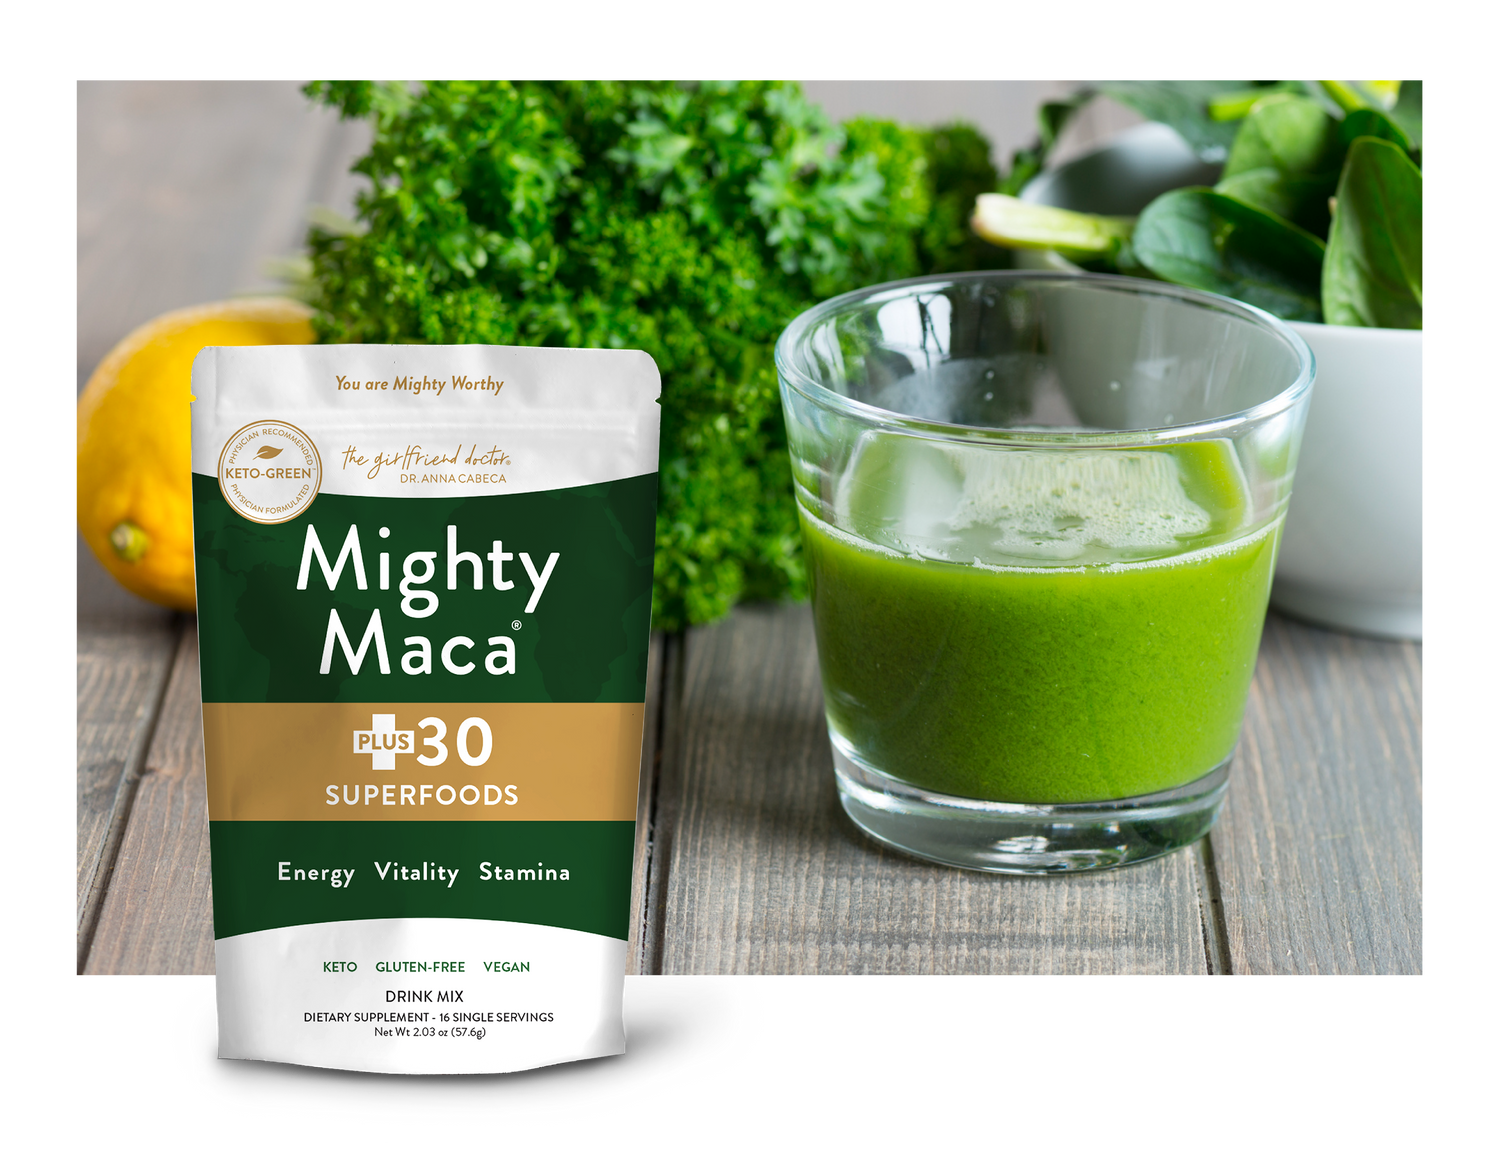 Bag of Mighty Maca Plus 16 Servings next to a glass containing a green drink